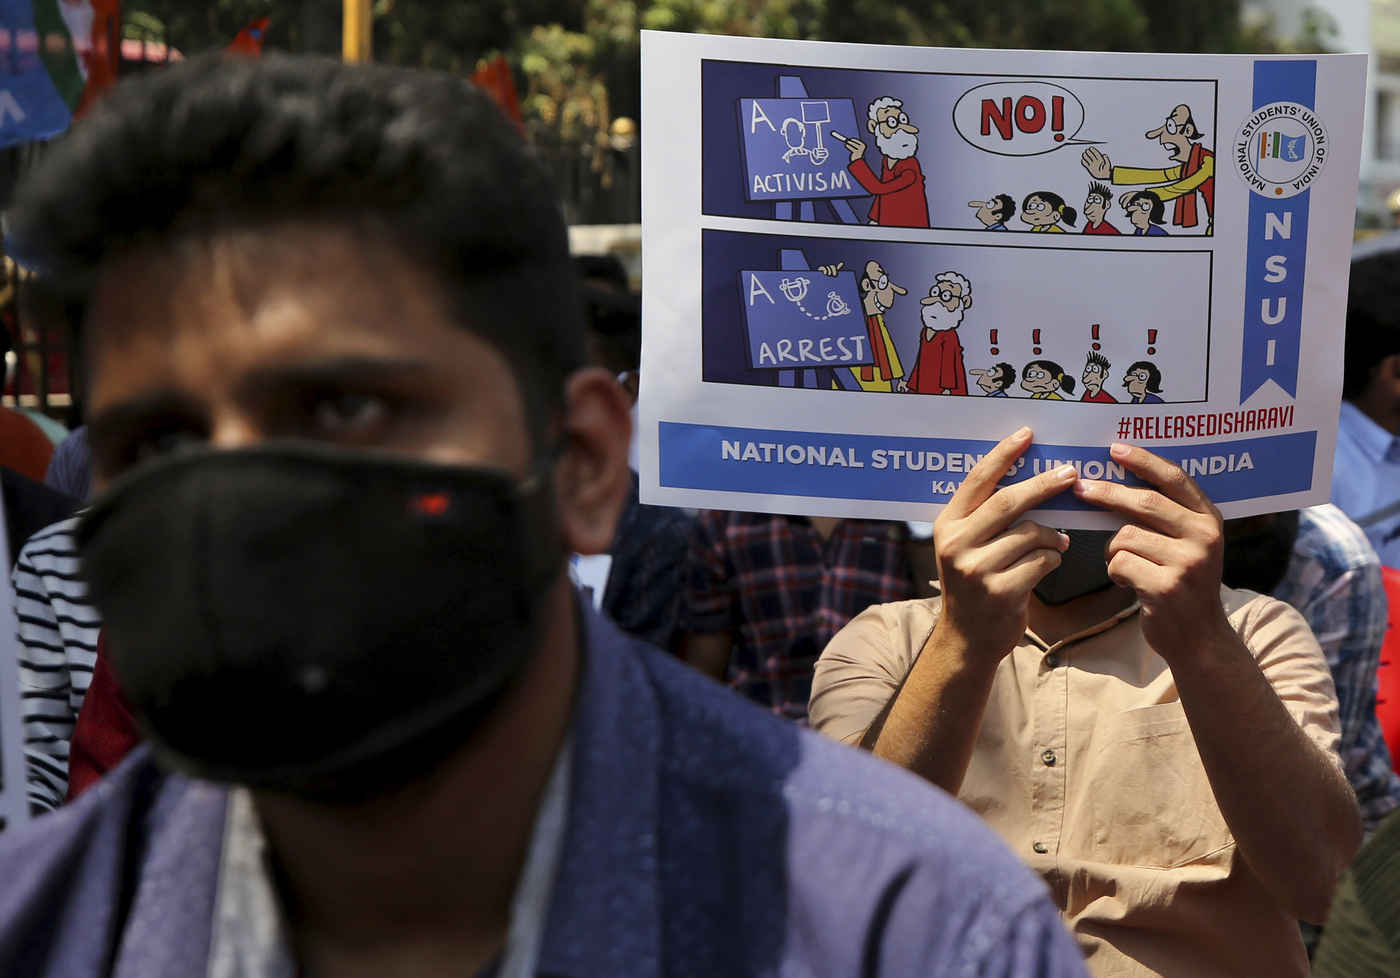 A students holds a placard demanding the release of Indian climate activist Disha Ravi, during a protest in Bengaluru, India, Tuesday, Feb.16 2021. Ravi, 22, was arrested in Bengaluru Saturday for circulating a document on social media supporting months of massive protests by farmers. Police said that the document spread misinformation about the farmer protests on the outskirts of New Delhi and "tarnished the image of India." (AP Photo/Aijaz Rahi)